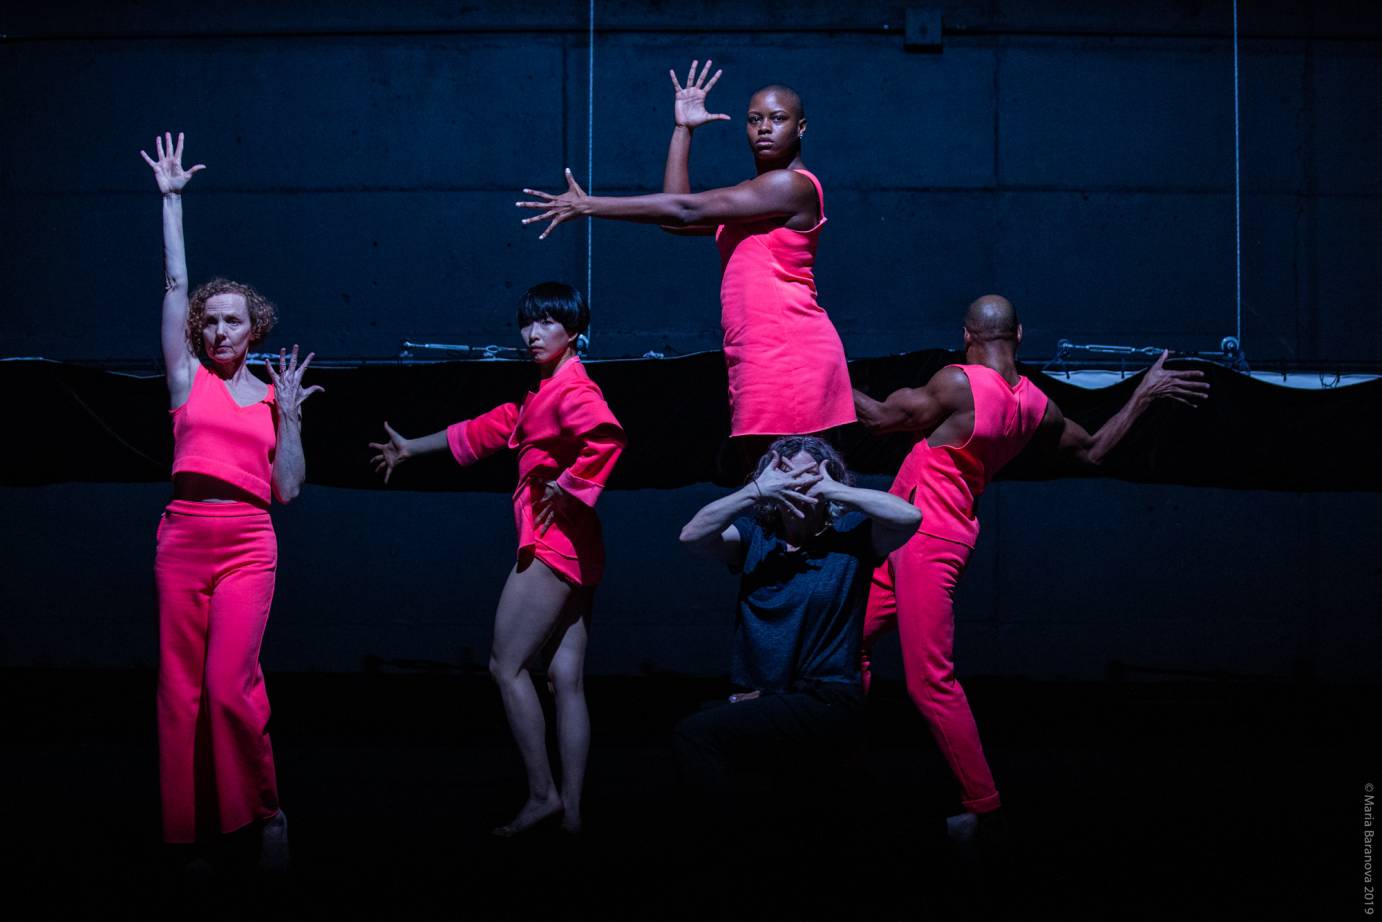 A group in bright pink makes voguing gestures with intense expressions